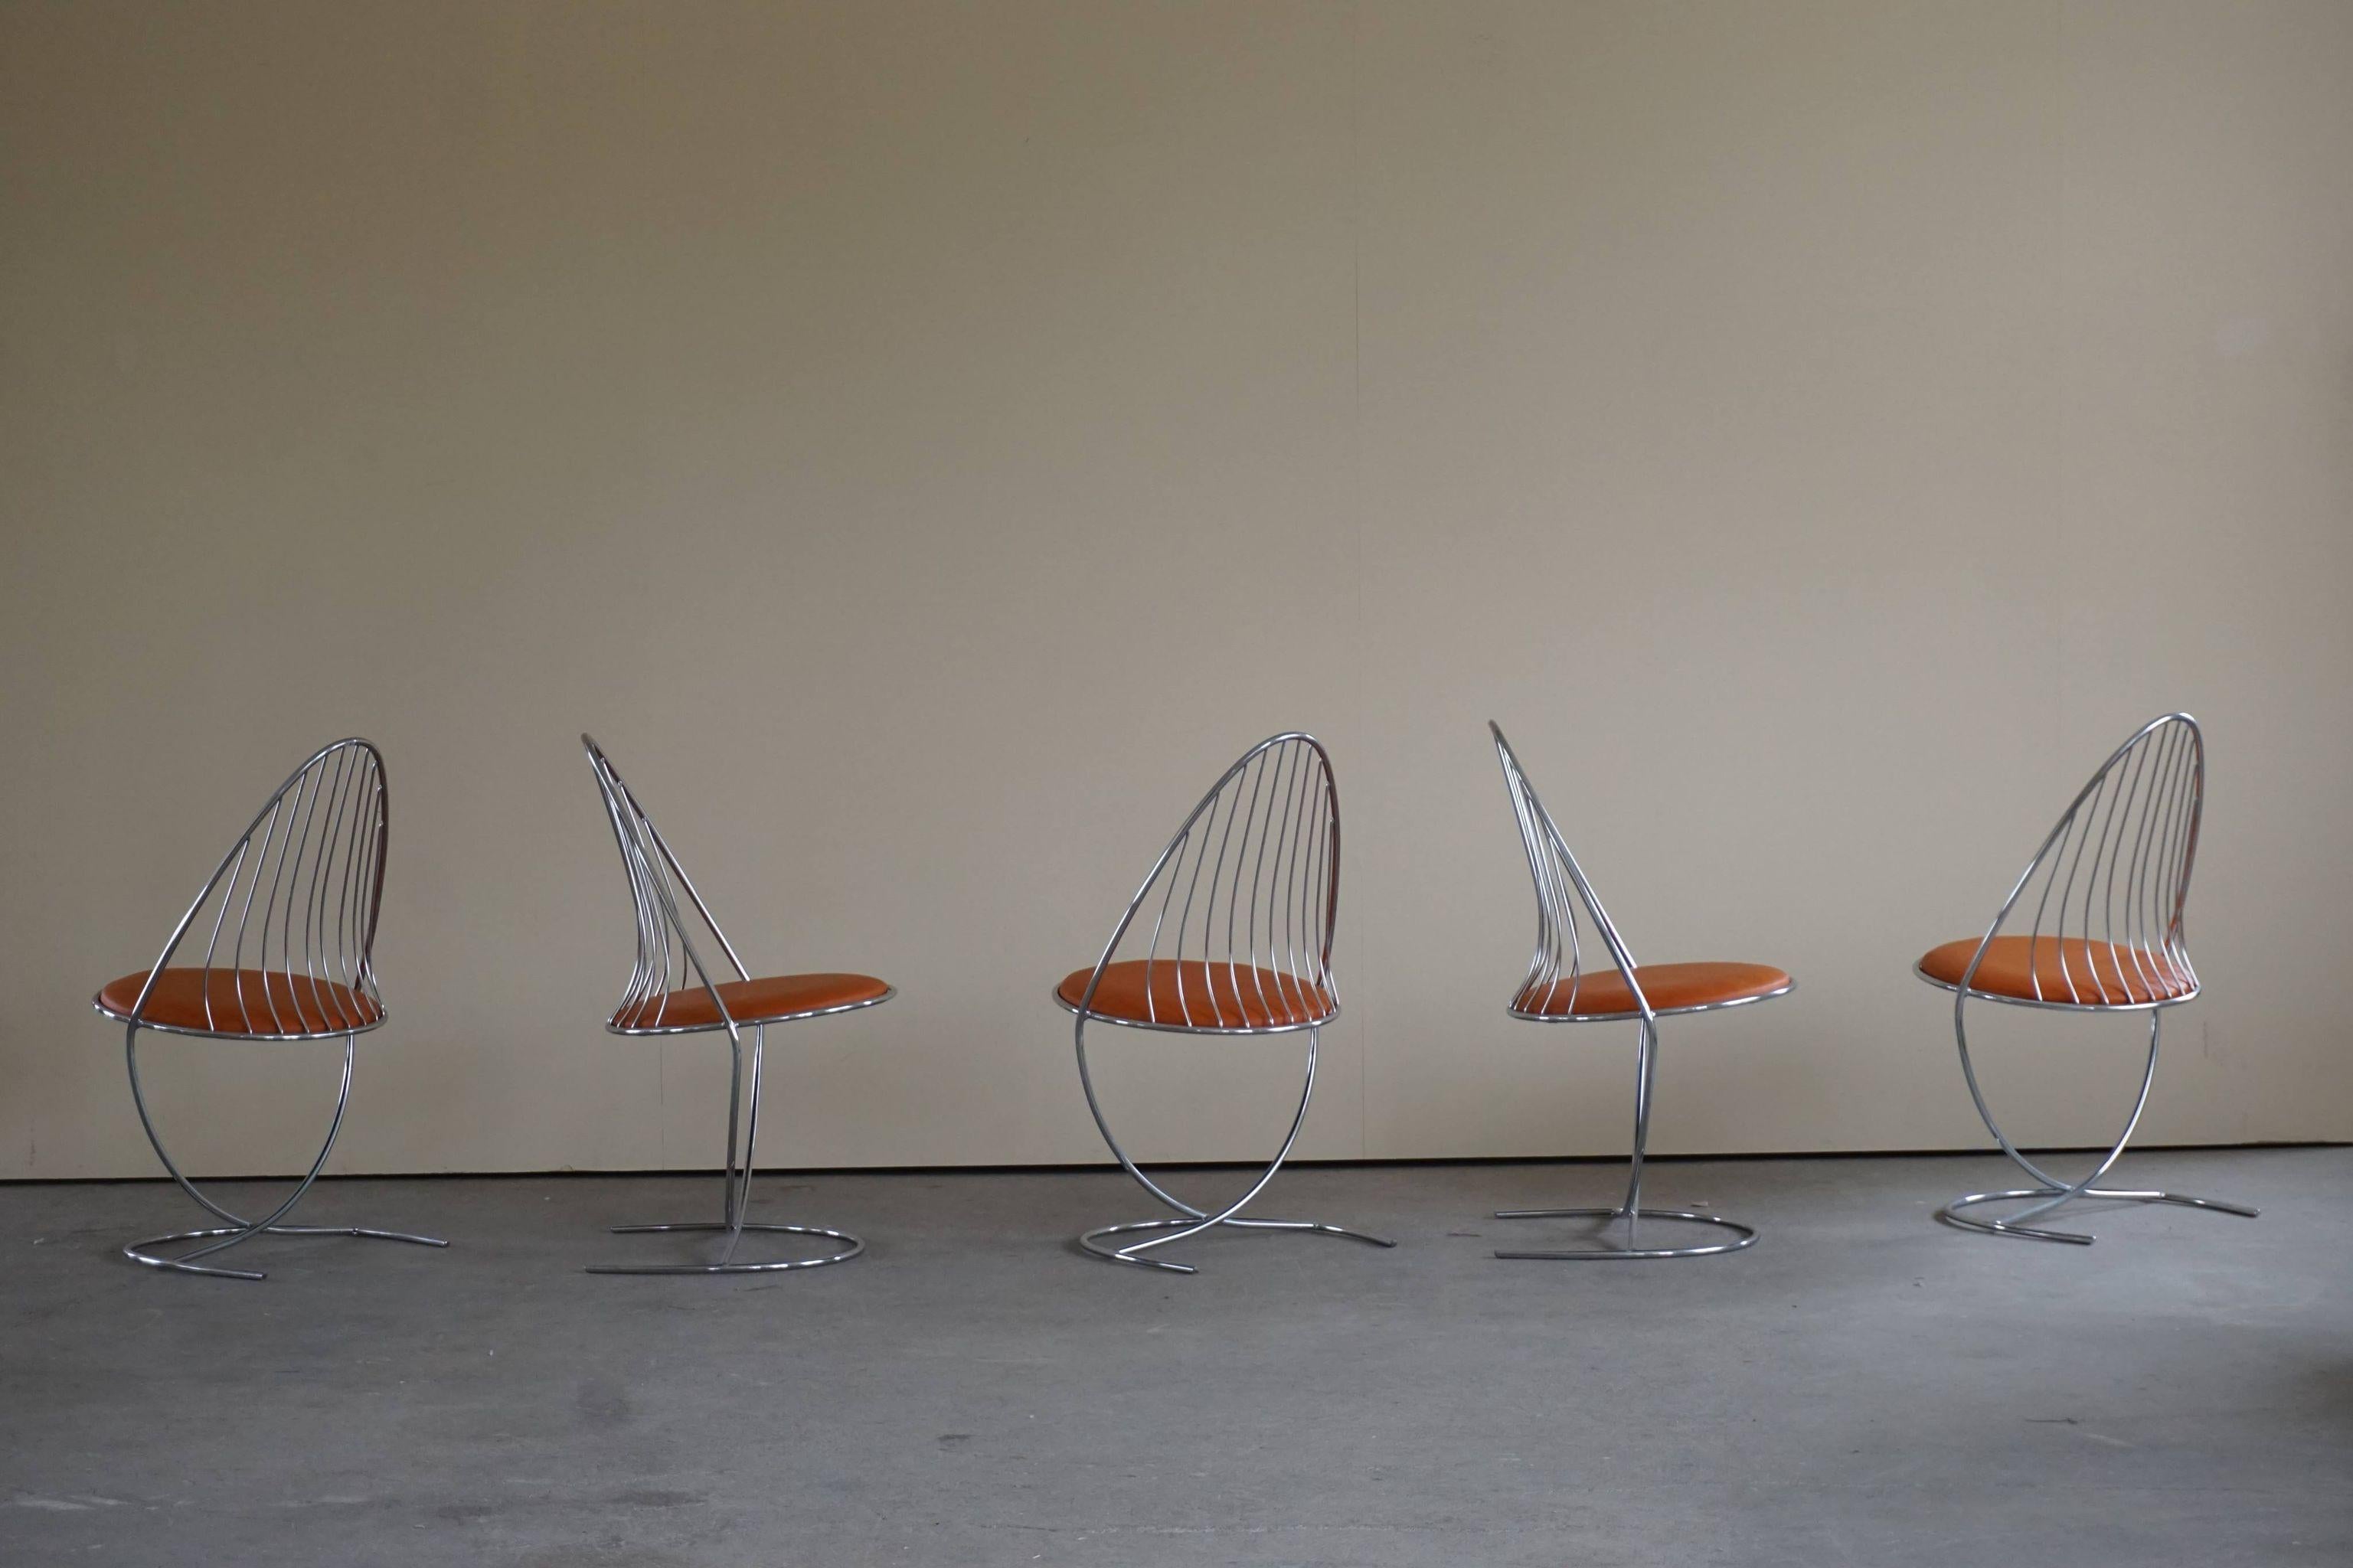 Set of 5 swedish mid century dining chairs in chrome and reupholstered seats in semi anilin leather, made by Dahlens Dalum, 1960s.

The chairs are stackable and in a overall good vintage condition.